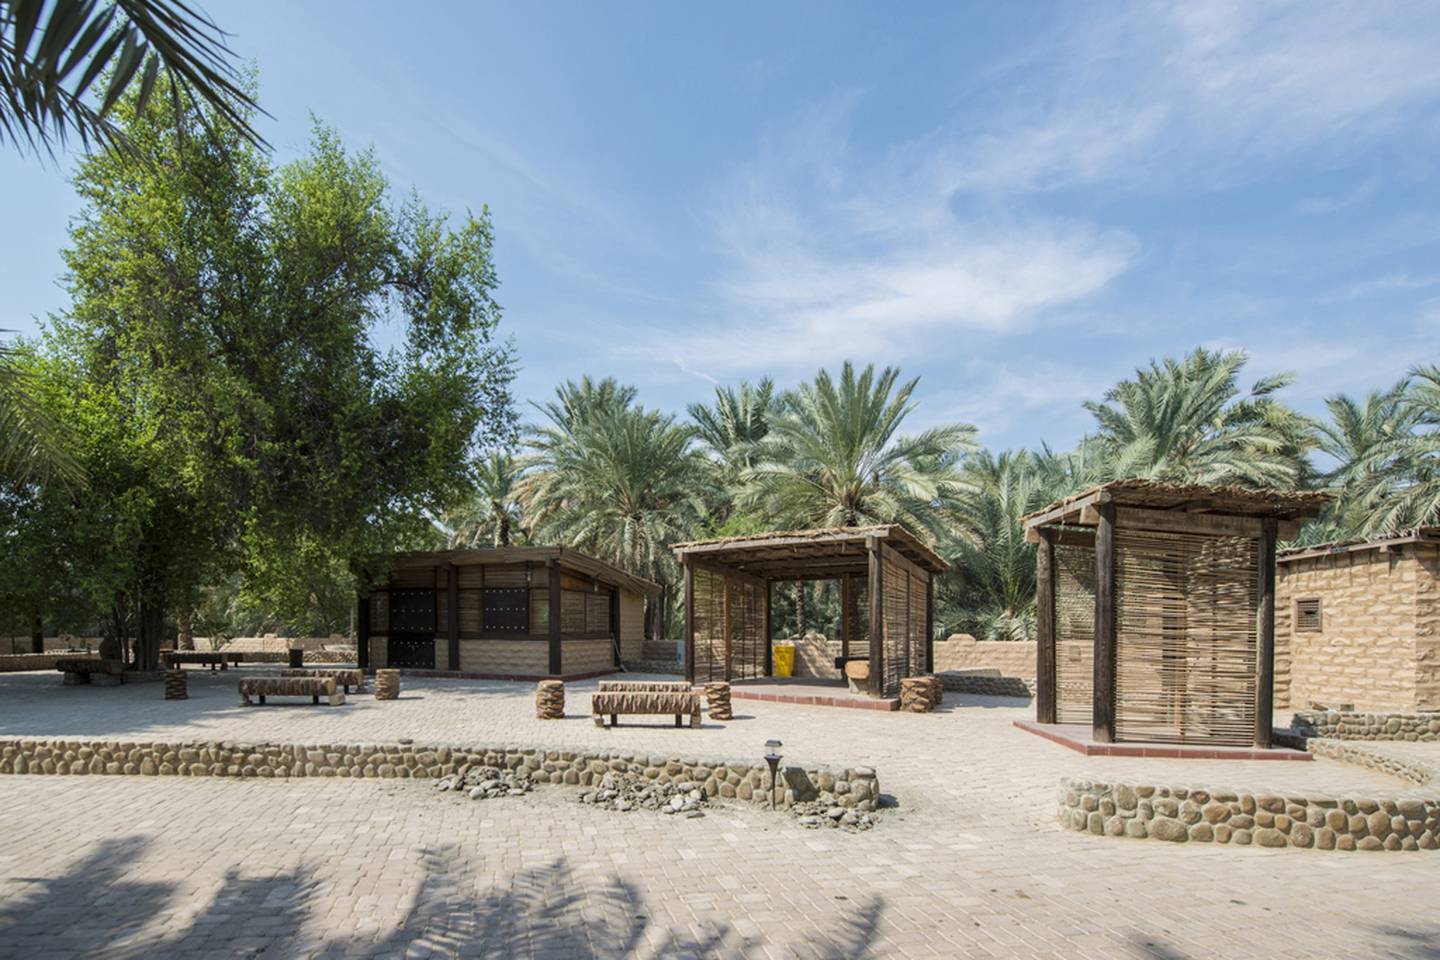 Al Ain Oasis, a Unesco World Heritage Site in Abu Dhabi. Photo: Abu Dhabi Tourism and Culture Authority